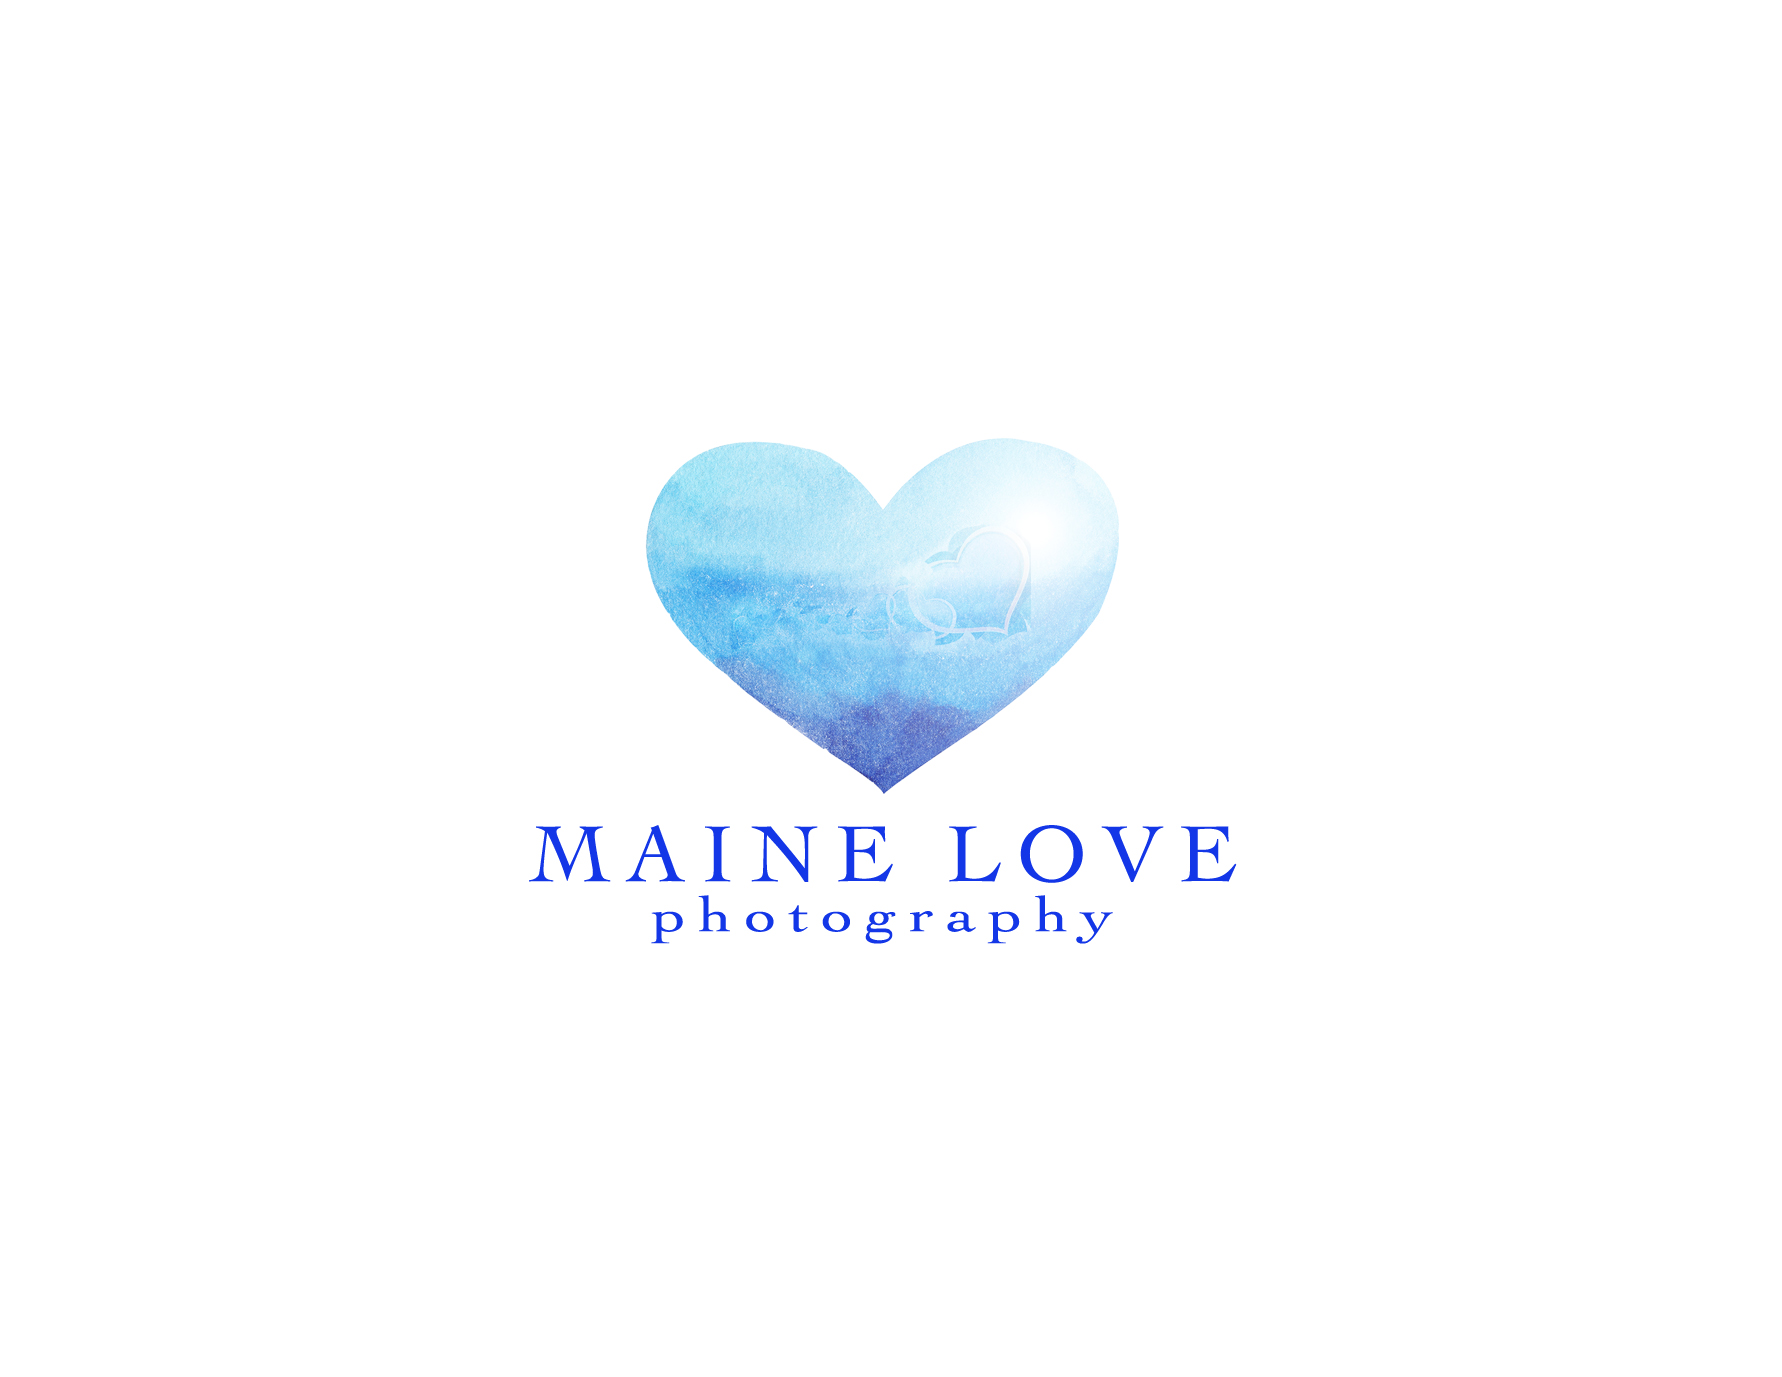 Maine love photography logo which is a Watercolor hand painted blue heart. Symbol of love.